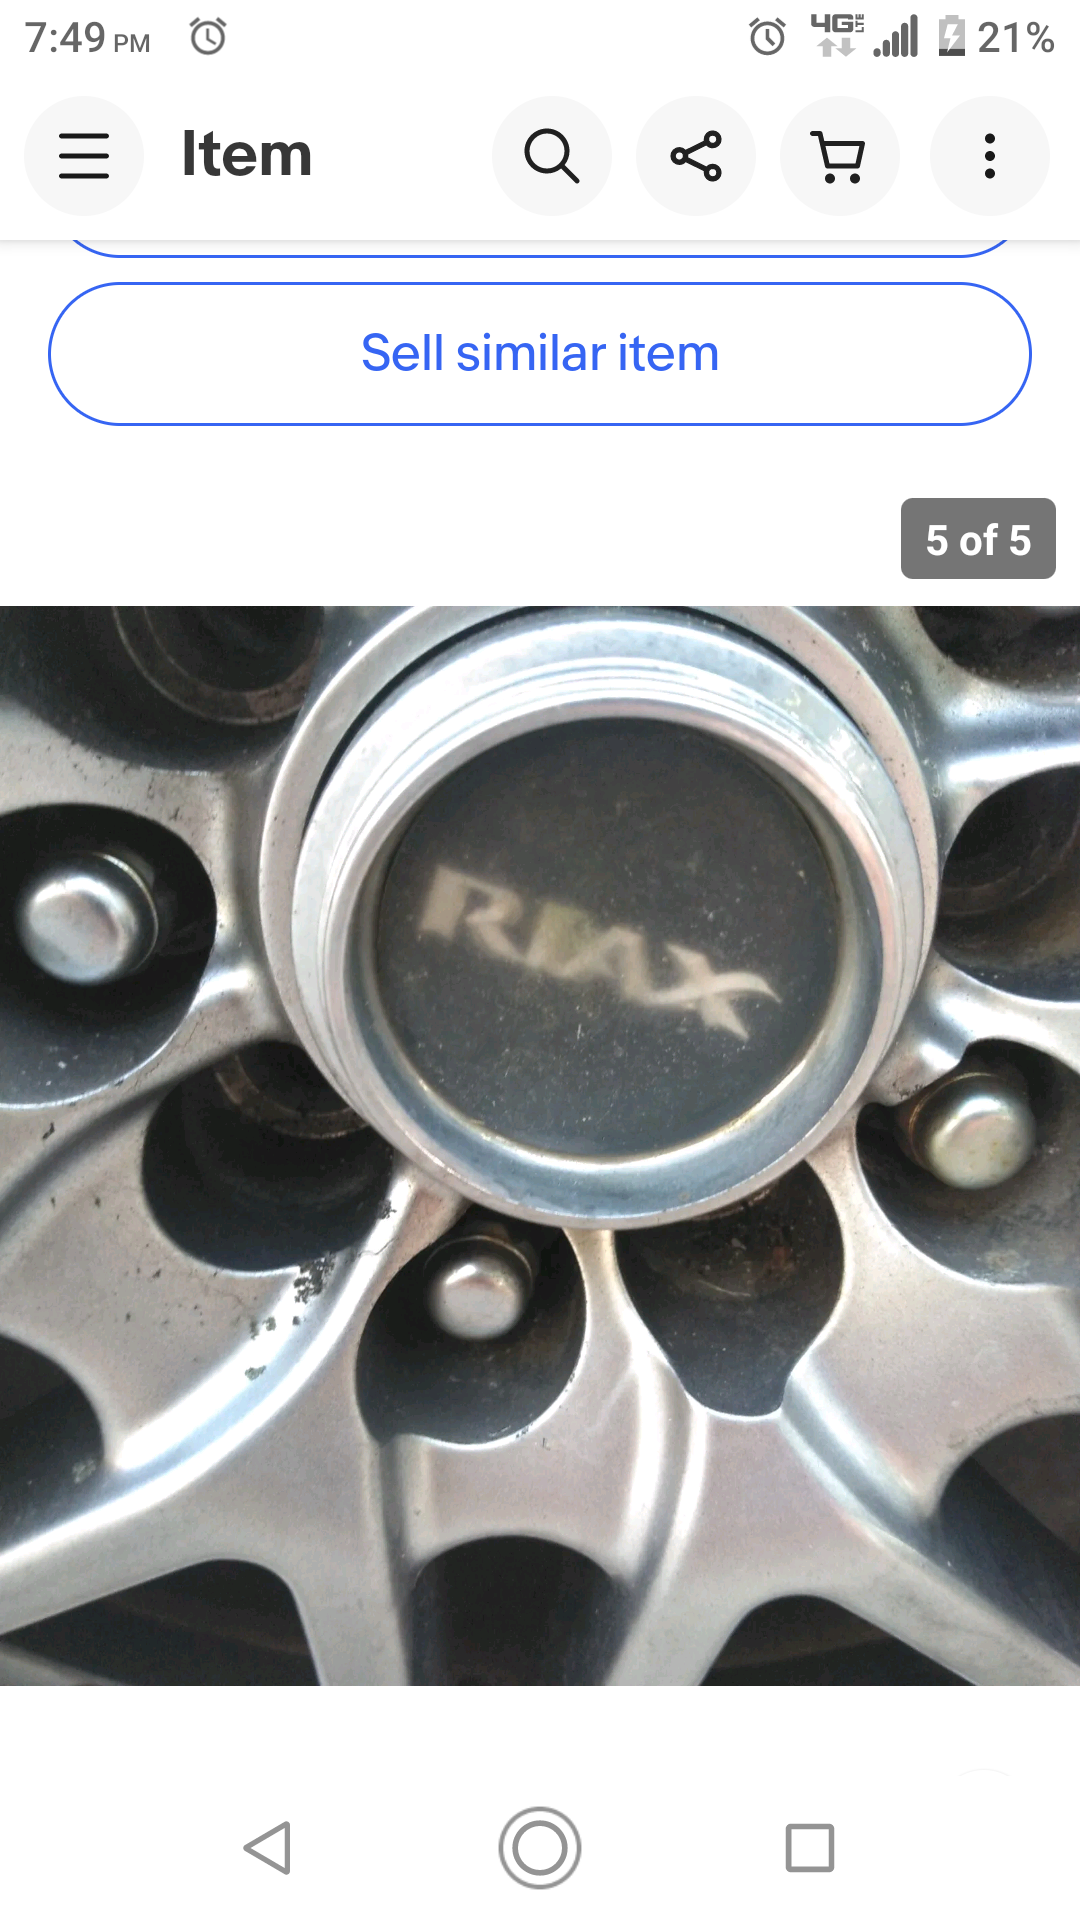 Wheels and Tires/Axles - 18 inch wheels - Used - Woodhaven, NY 11421, United States